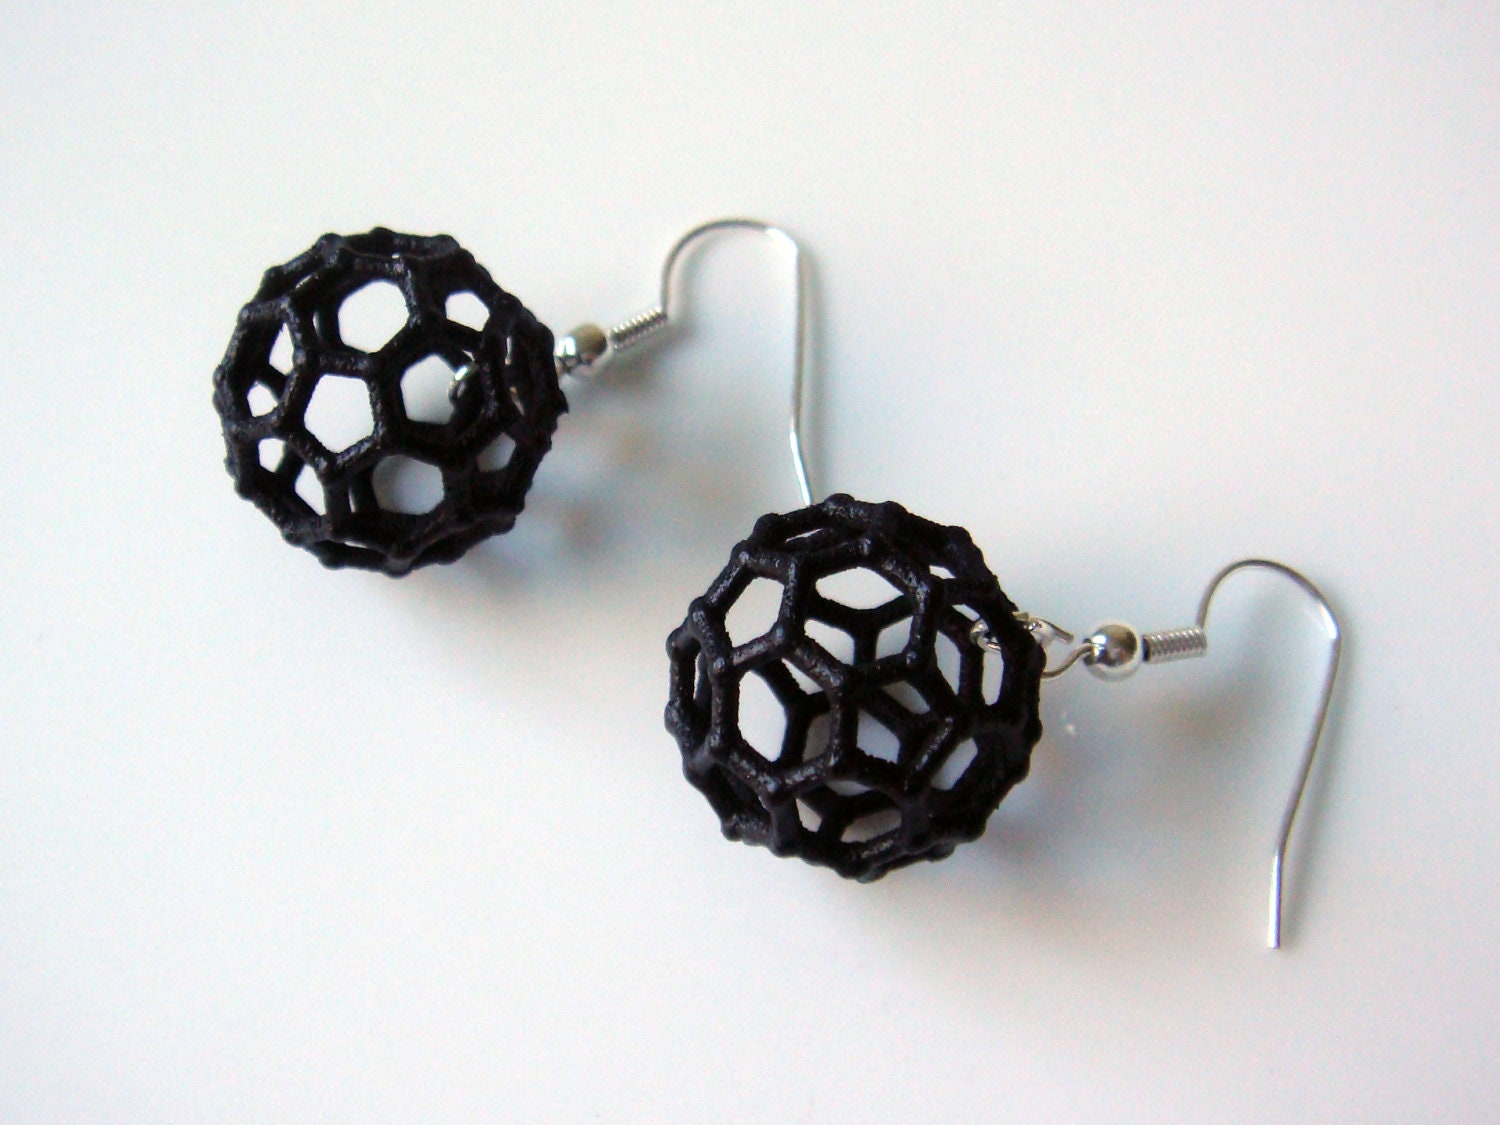 Buckyball Chemistry Molecule Earrings for scientists and engineers - Stark060